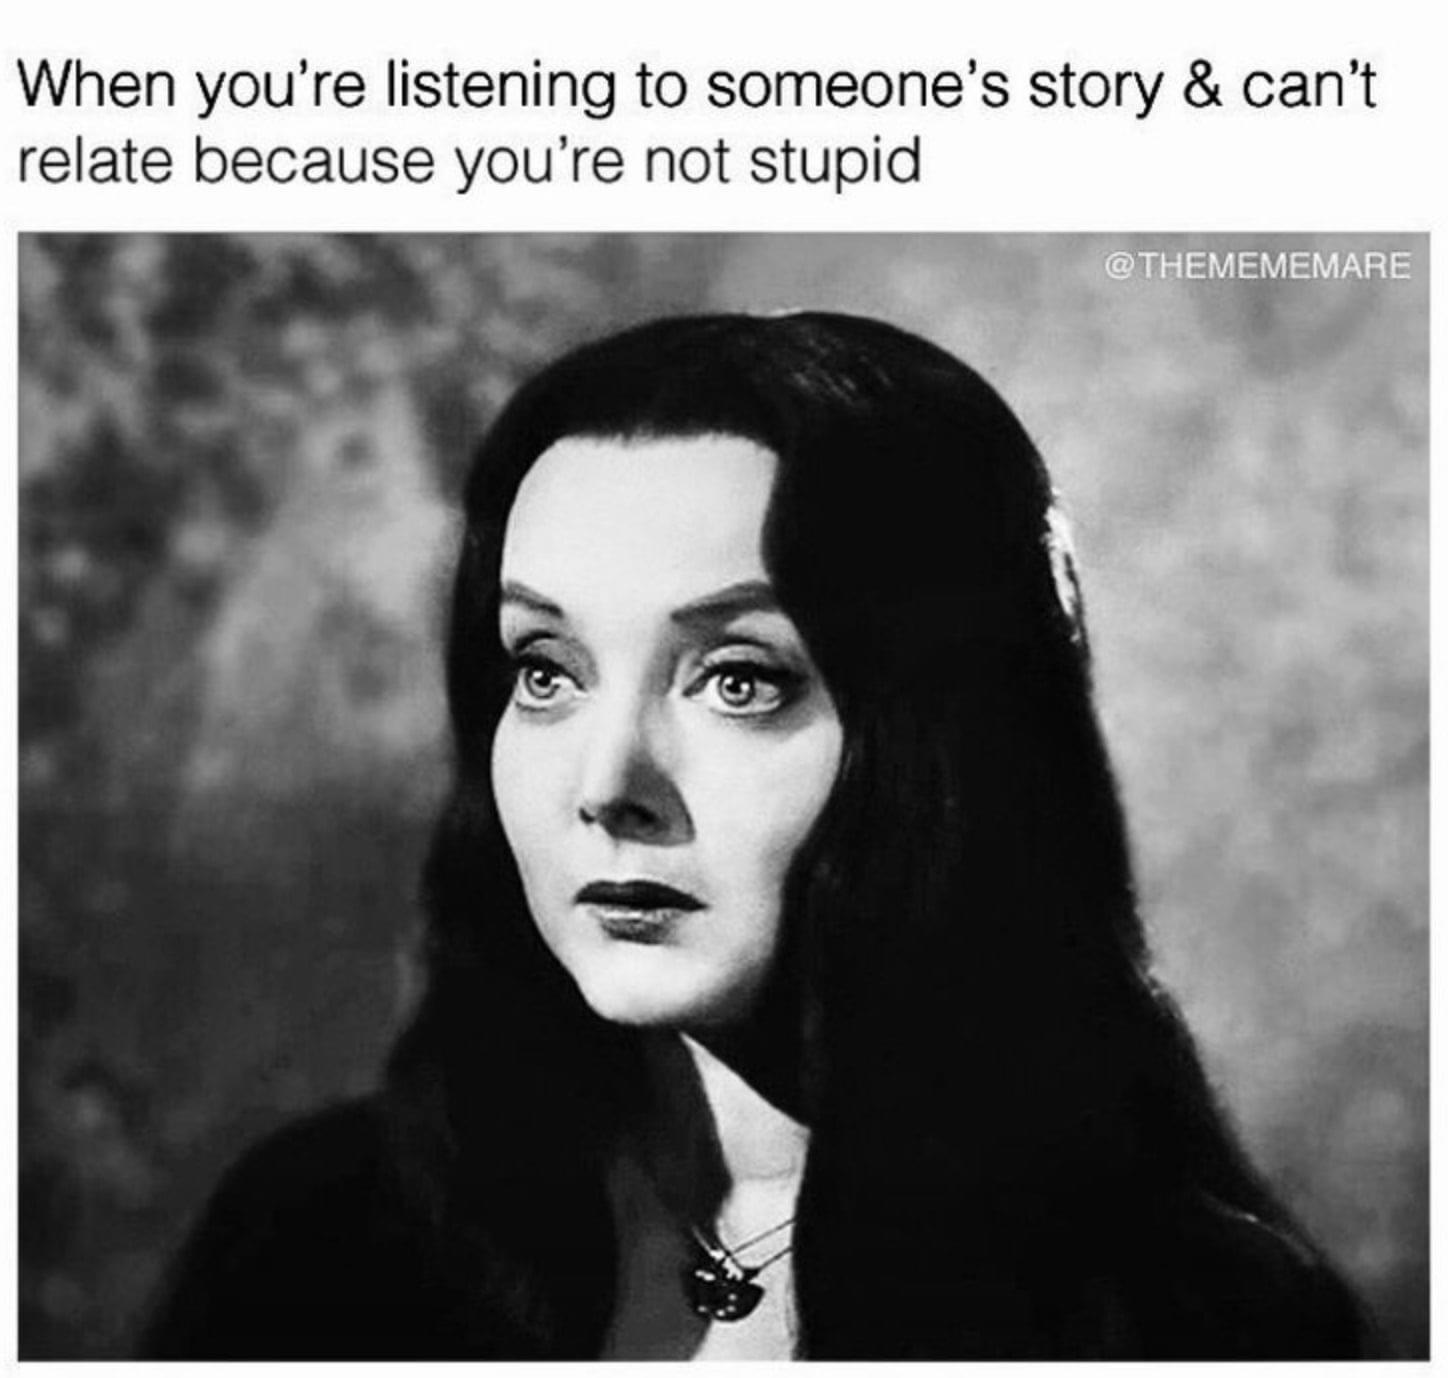 dank memes - morticia addams - When you're listening to someone's story & can't relate because you're not stupid